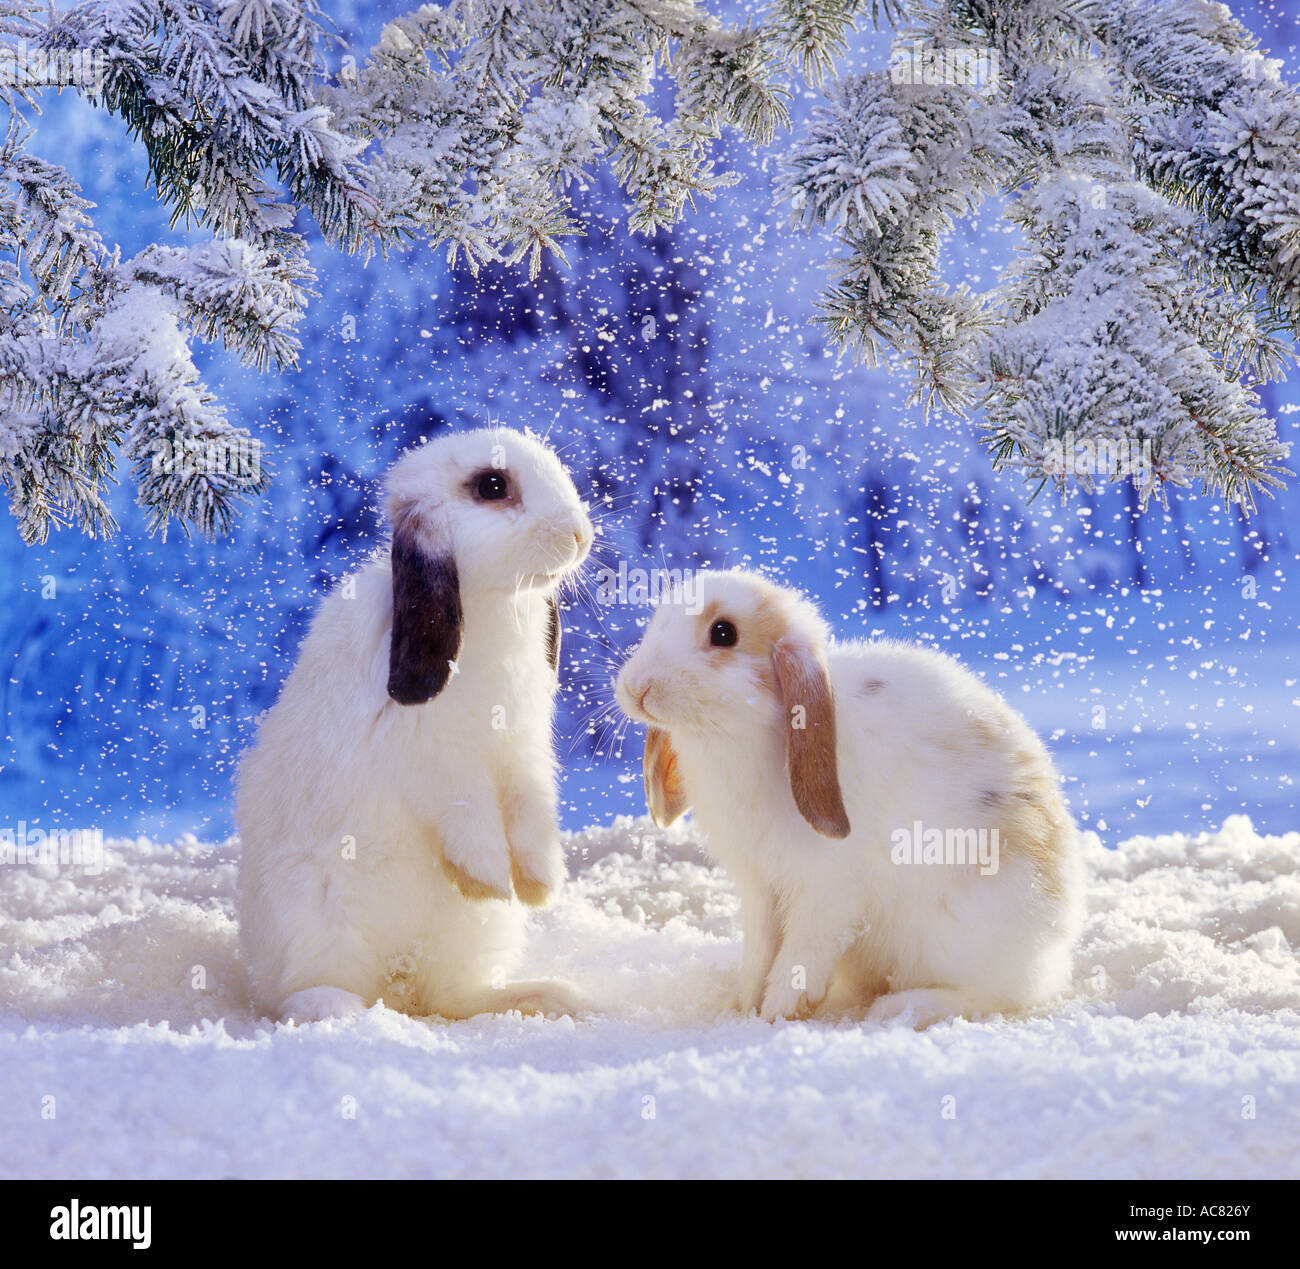 Two Lop Eared Dwarf Rabbits In Snow Stock Photo Alamy